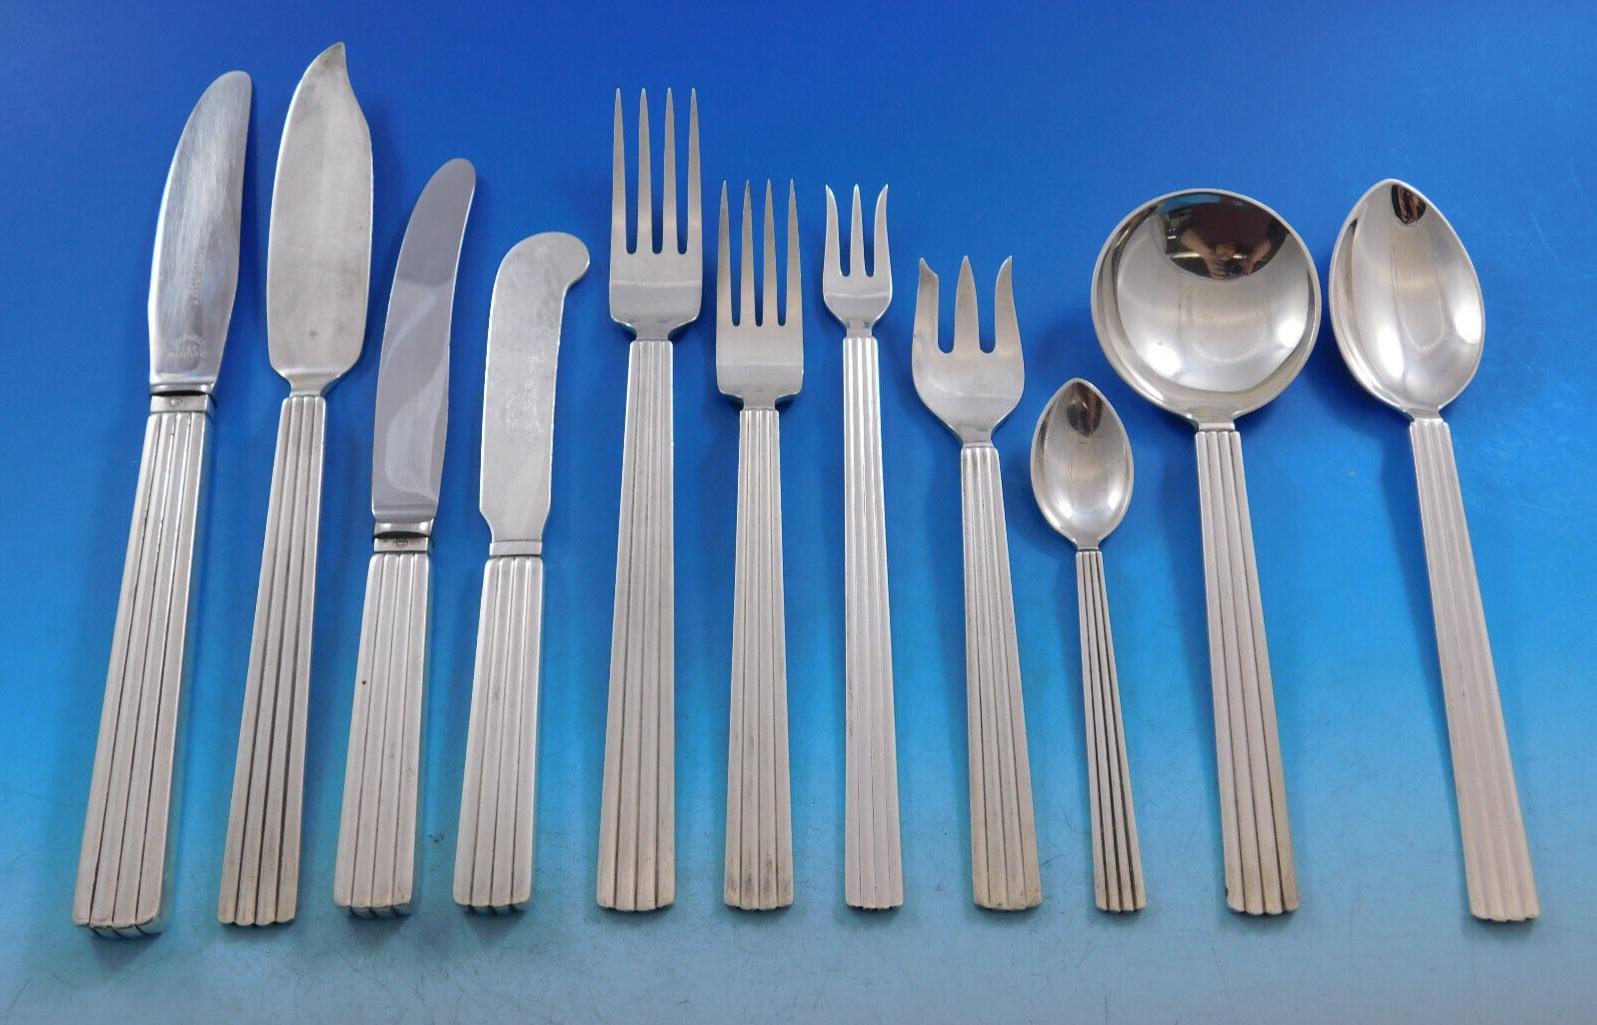 Bernadotte embodies the story of the Georg Jensen heritage. Designed by Prince Sigvard Bernadotte in 1939, it is the cutlery of choice for anyone who appreciates the smooth feel of fine design and the resonant timelessness of dining among loved